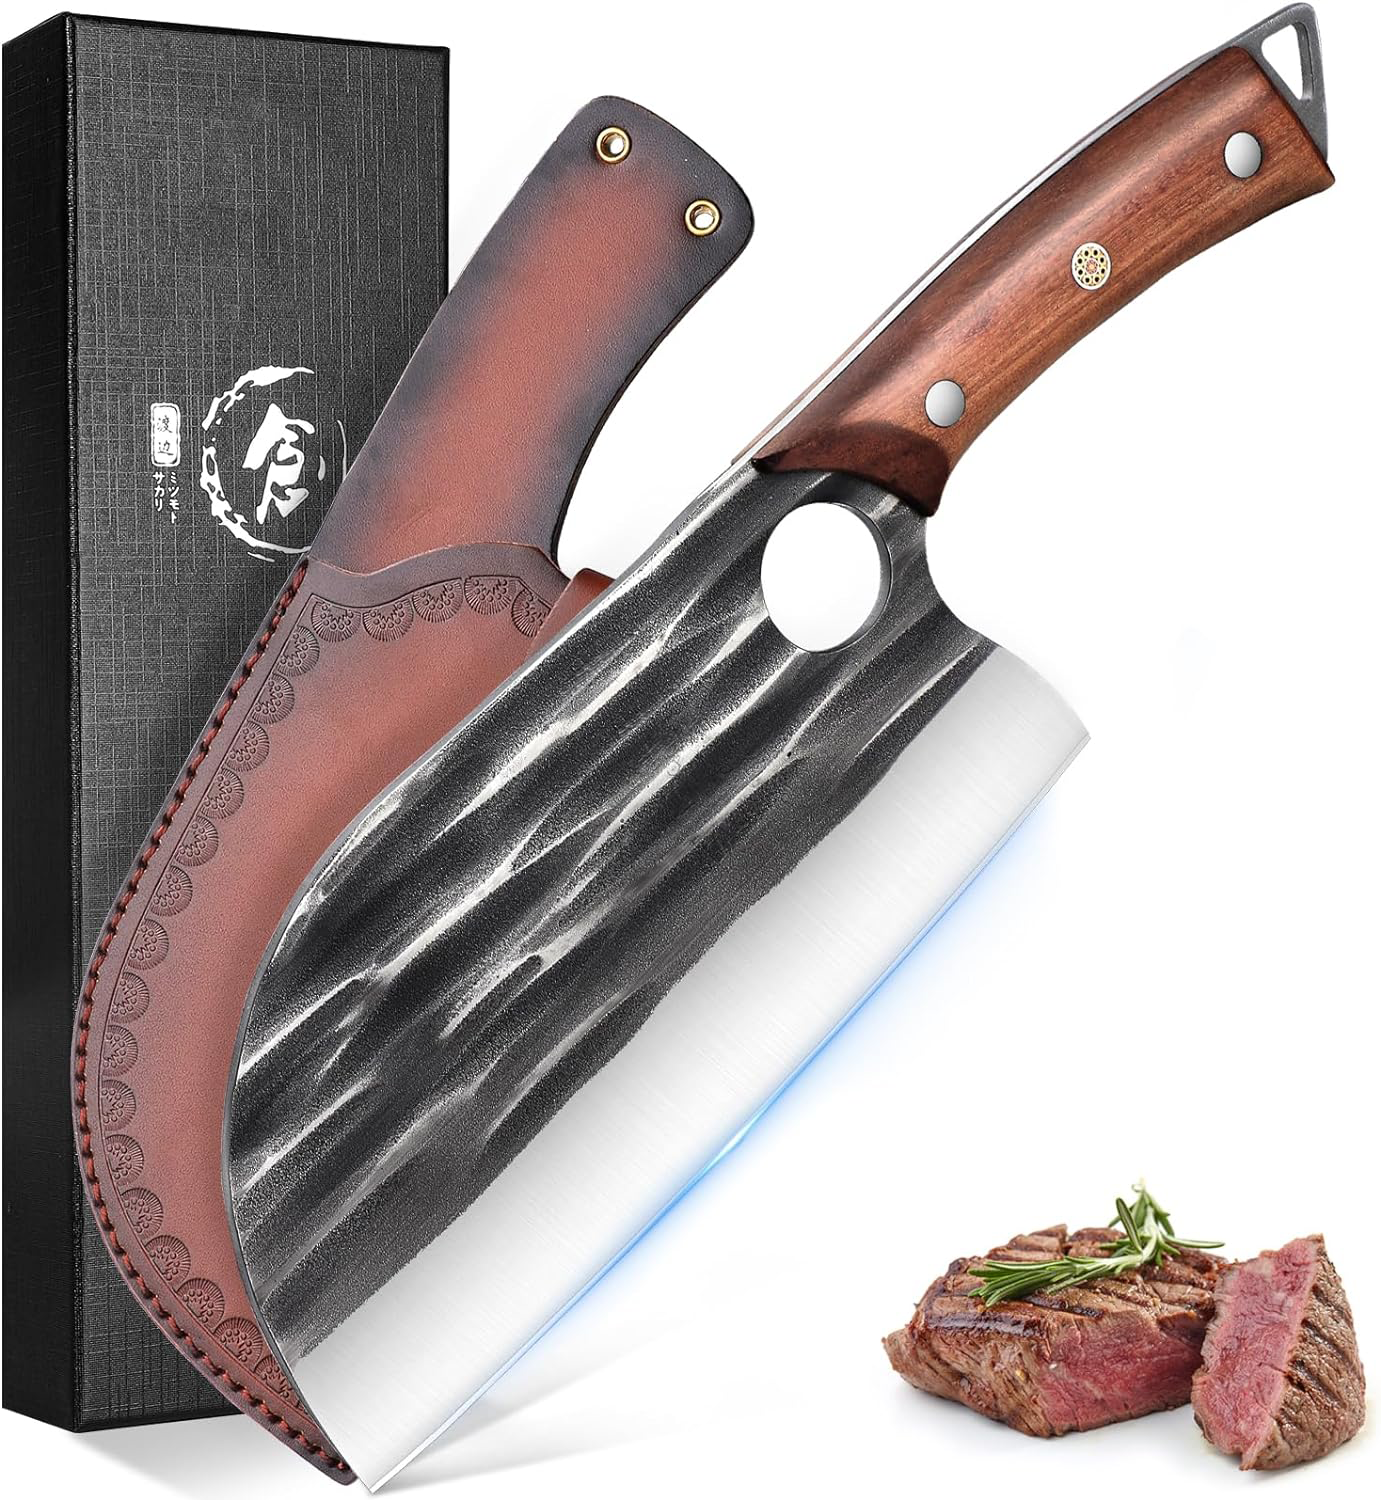 KD 7.2 inch Serbian Cleaver Knife: Ideal for Kitchen and Outdoors